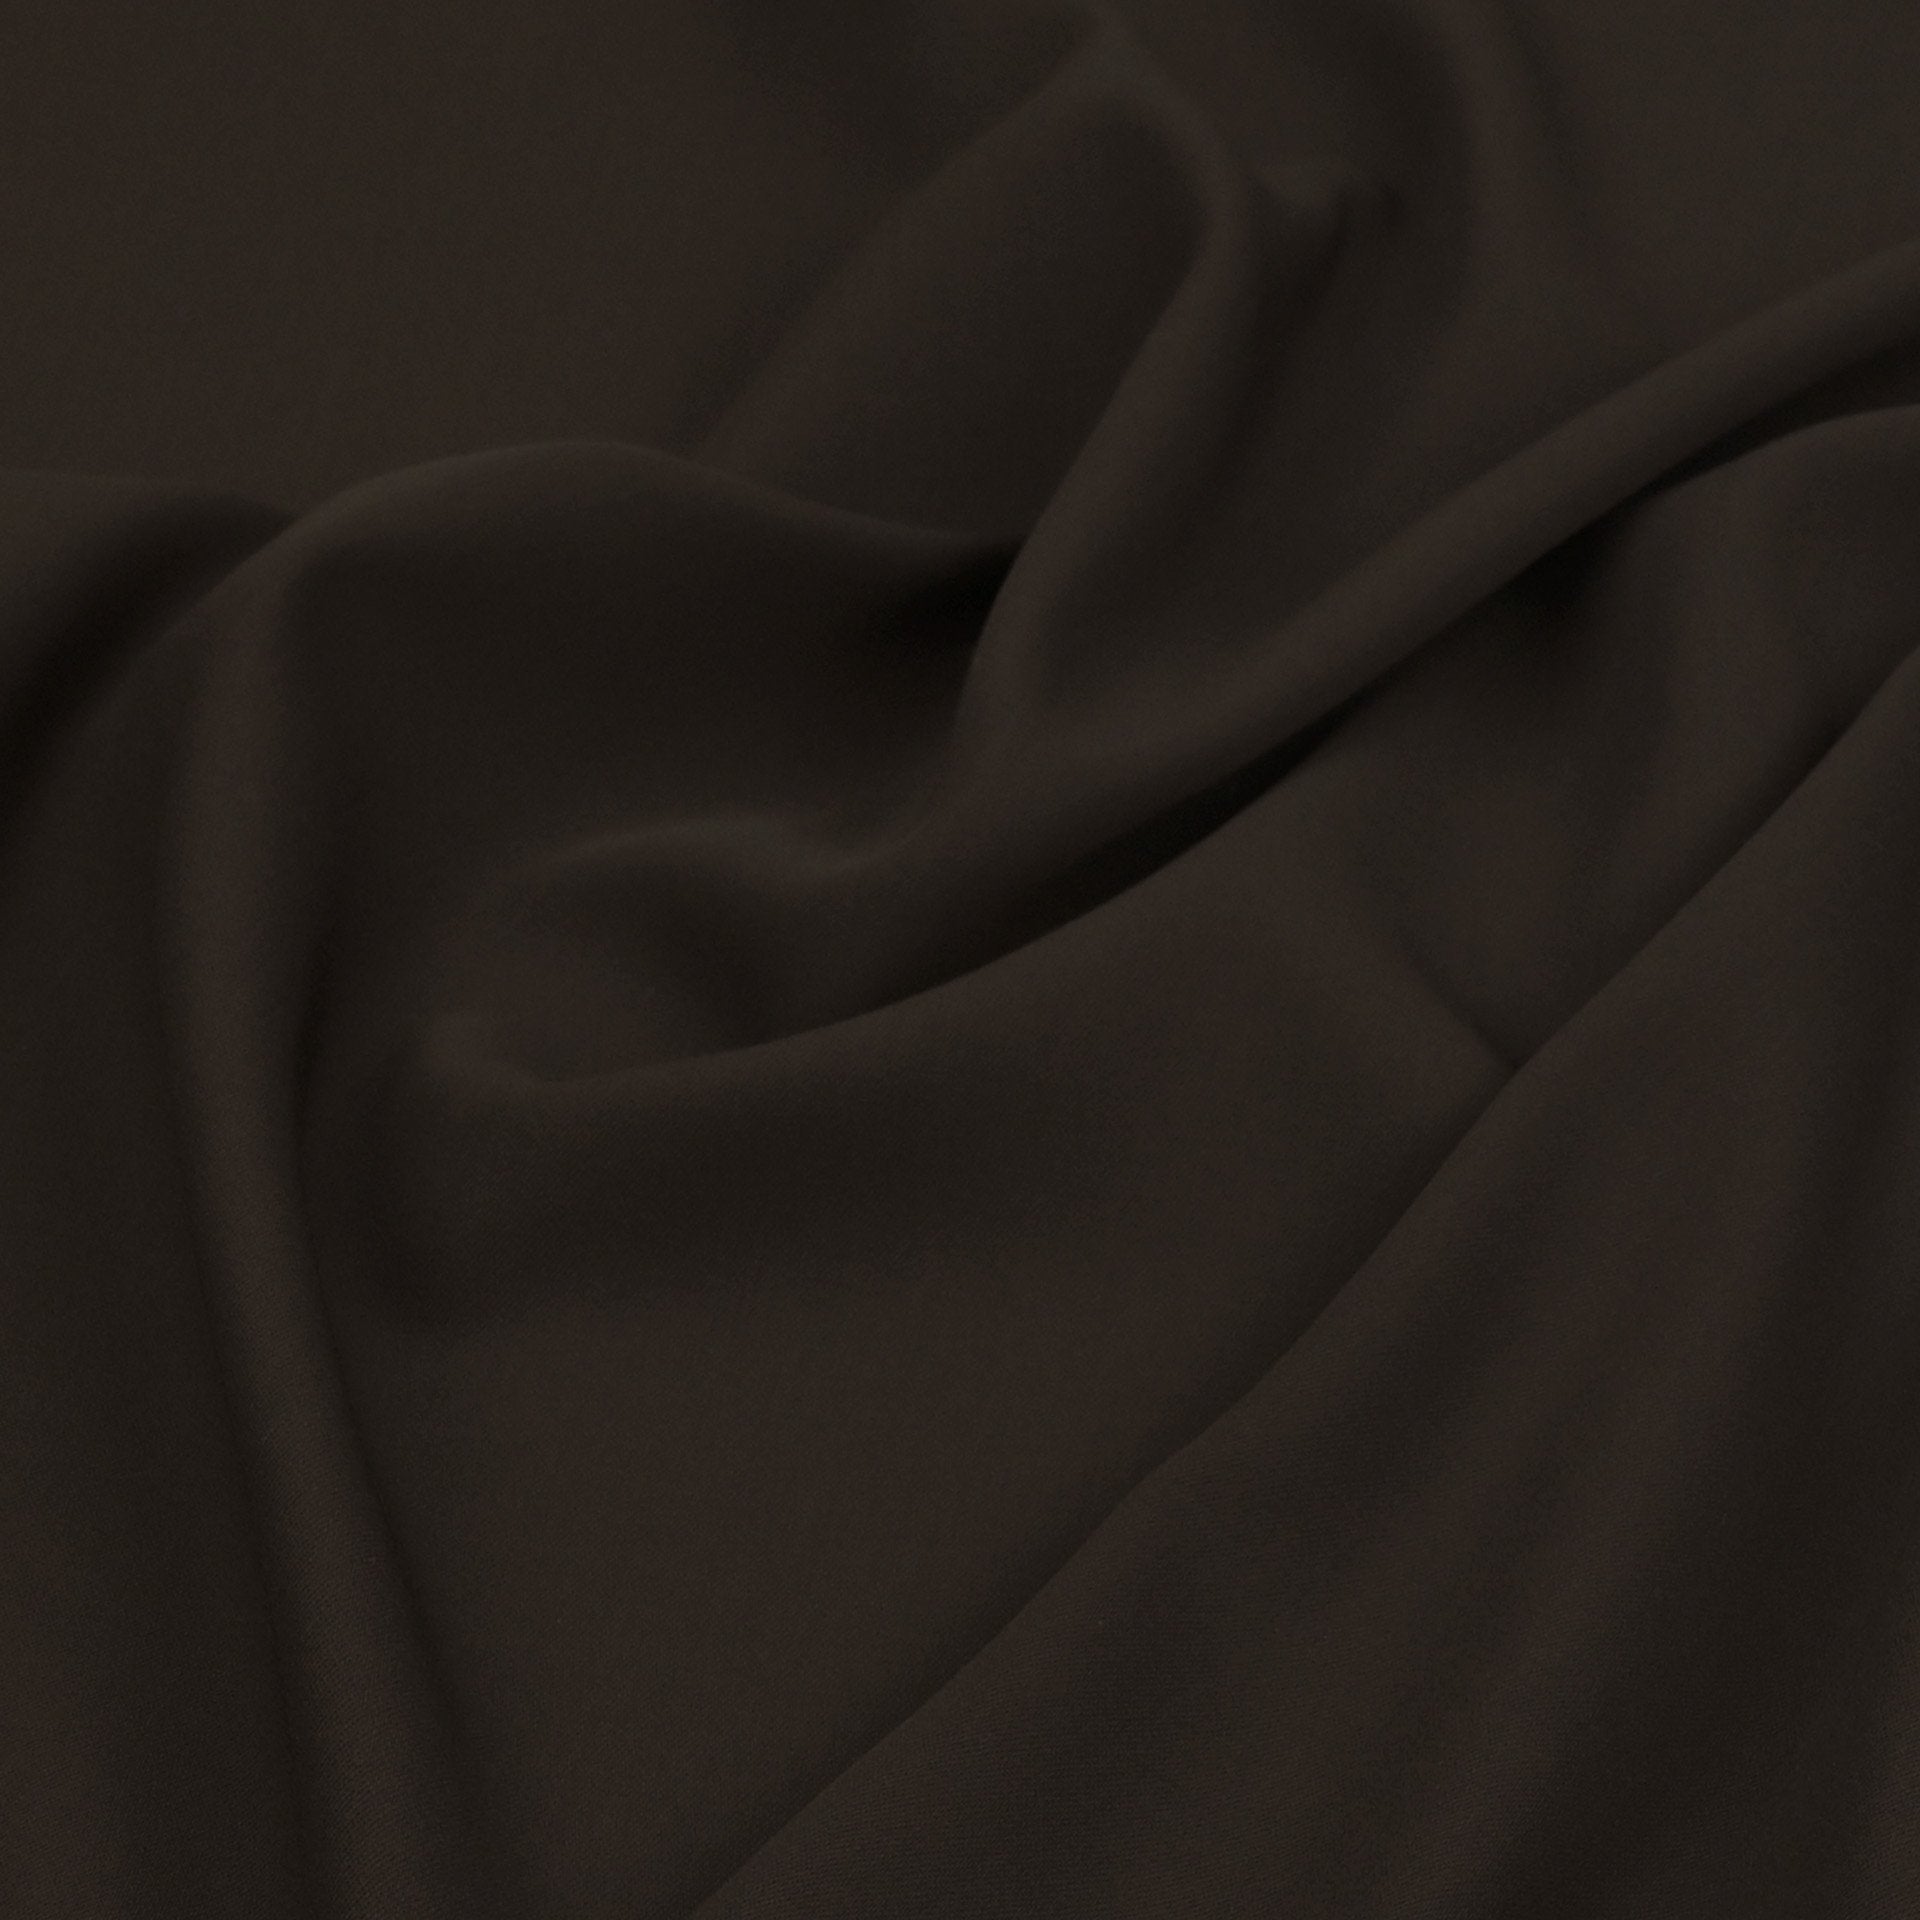 Brown Suiting Fabric 98308